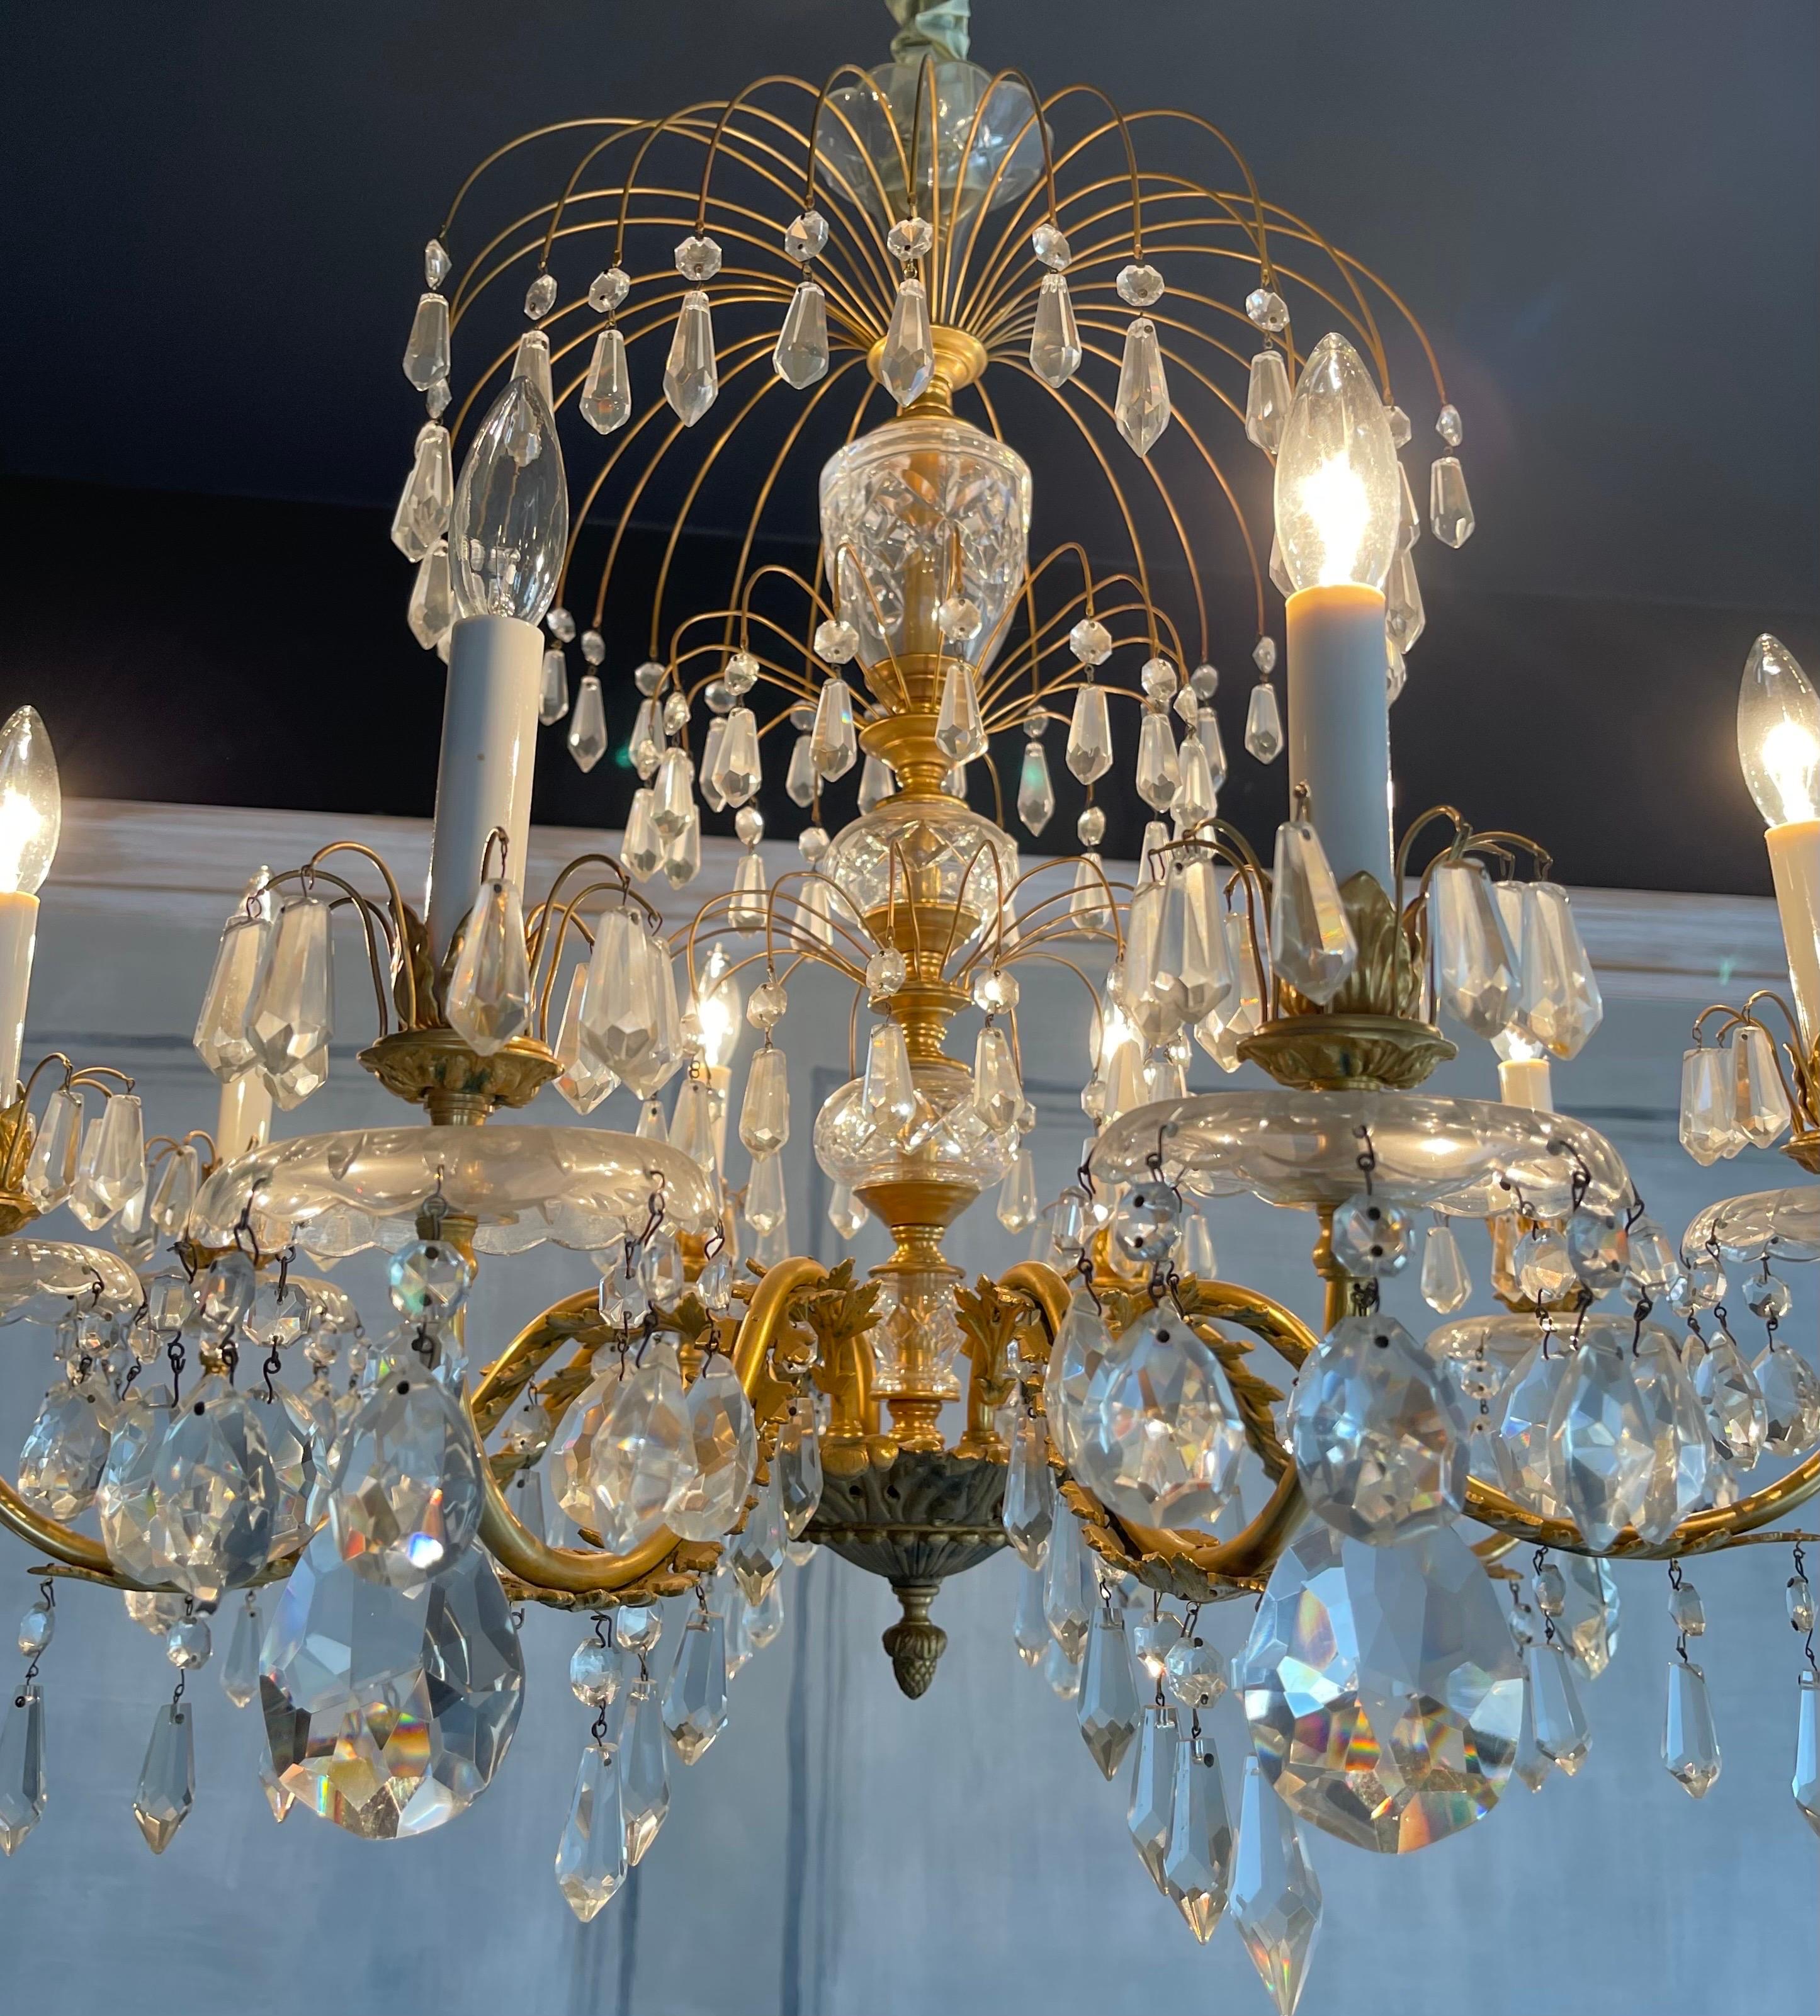 Fine French Empire Neoclassical Regency Dore Bronze Crystal Basket Chandelier In Good Condition For Sale In Roslyn, NY